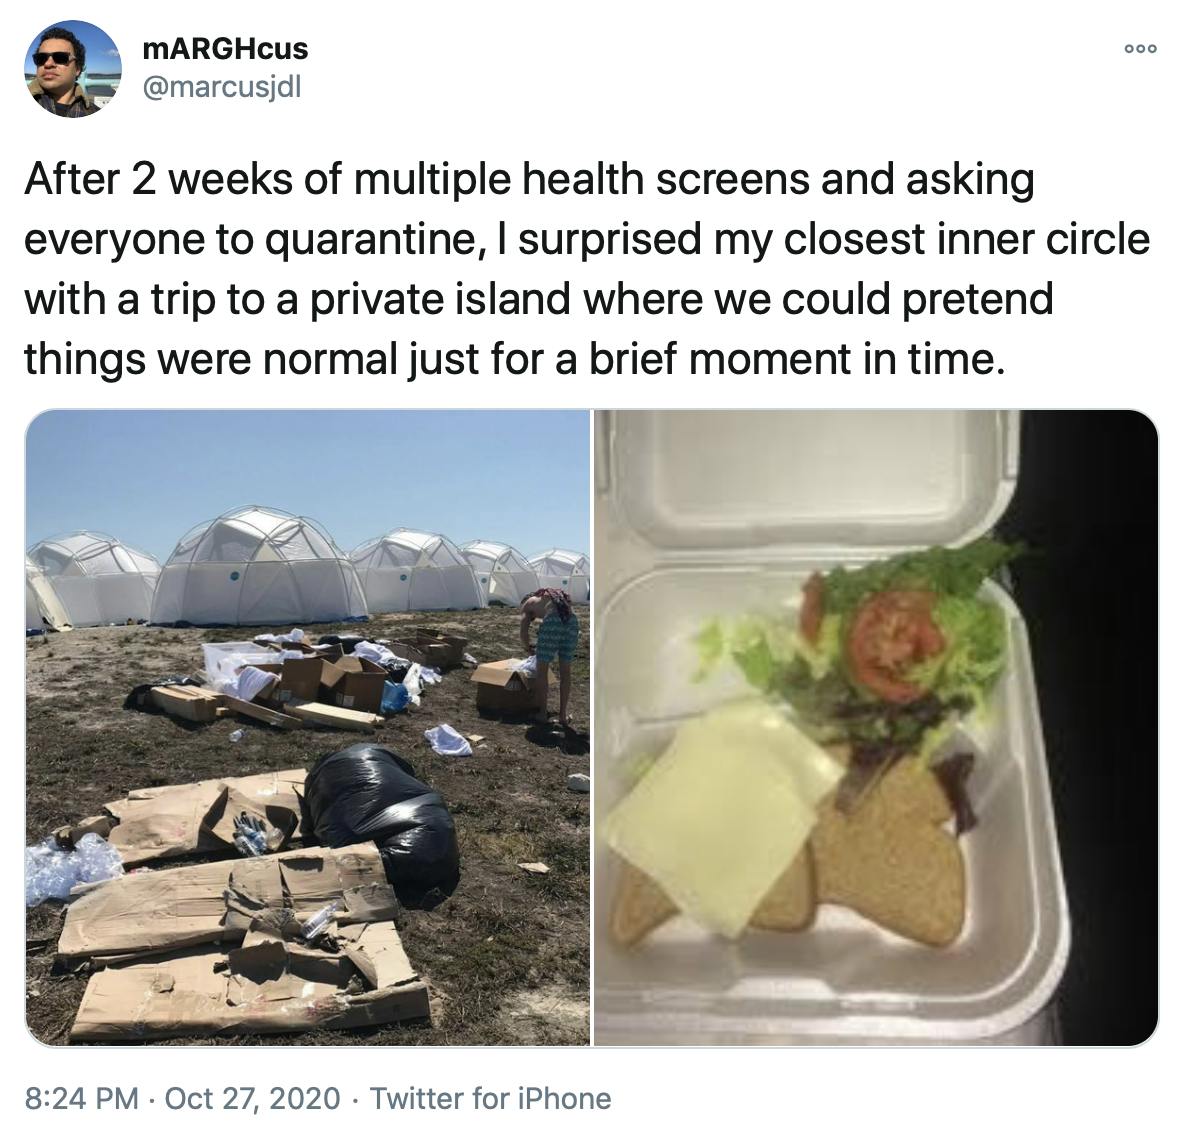 'After 2 weeks of multiple health screens and asking everyone to quarantine, I surprised my closest inner circle with a trip to a private island where we could pretend things were normal just for a brief moment in time.' pictures of the trash filled campsite and disappointing cheese sandwiches from the Fyre Festival